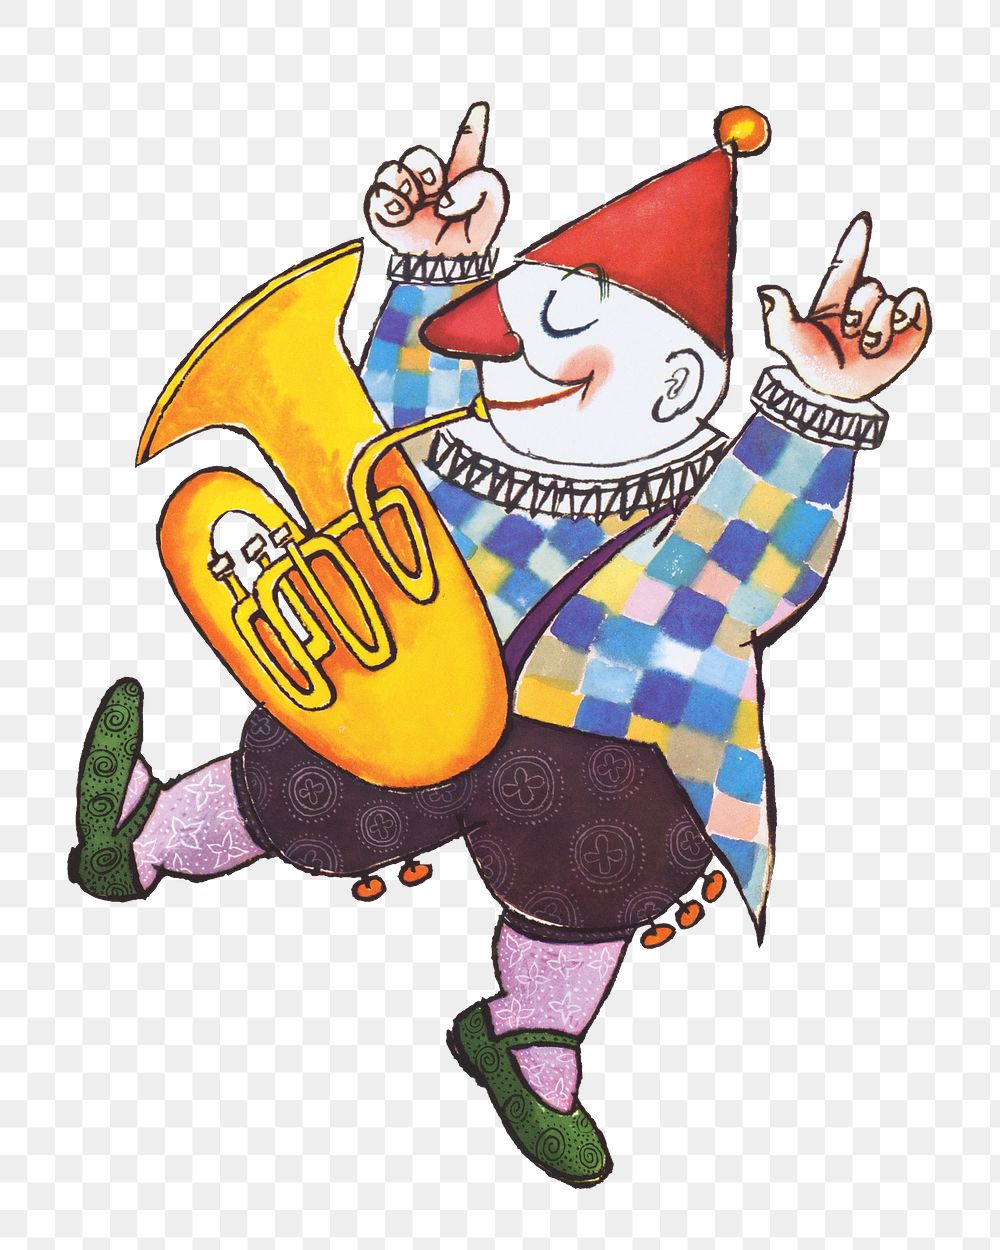 Clown playing tuba png character sticker, transparent background.  Remixed by rawpixel.